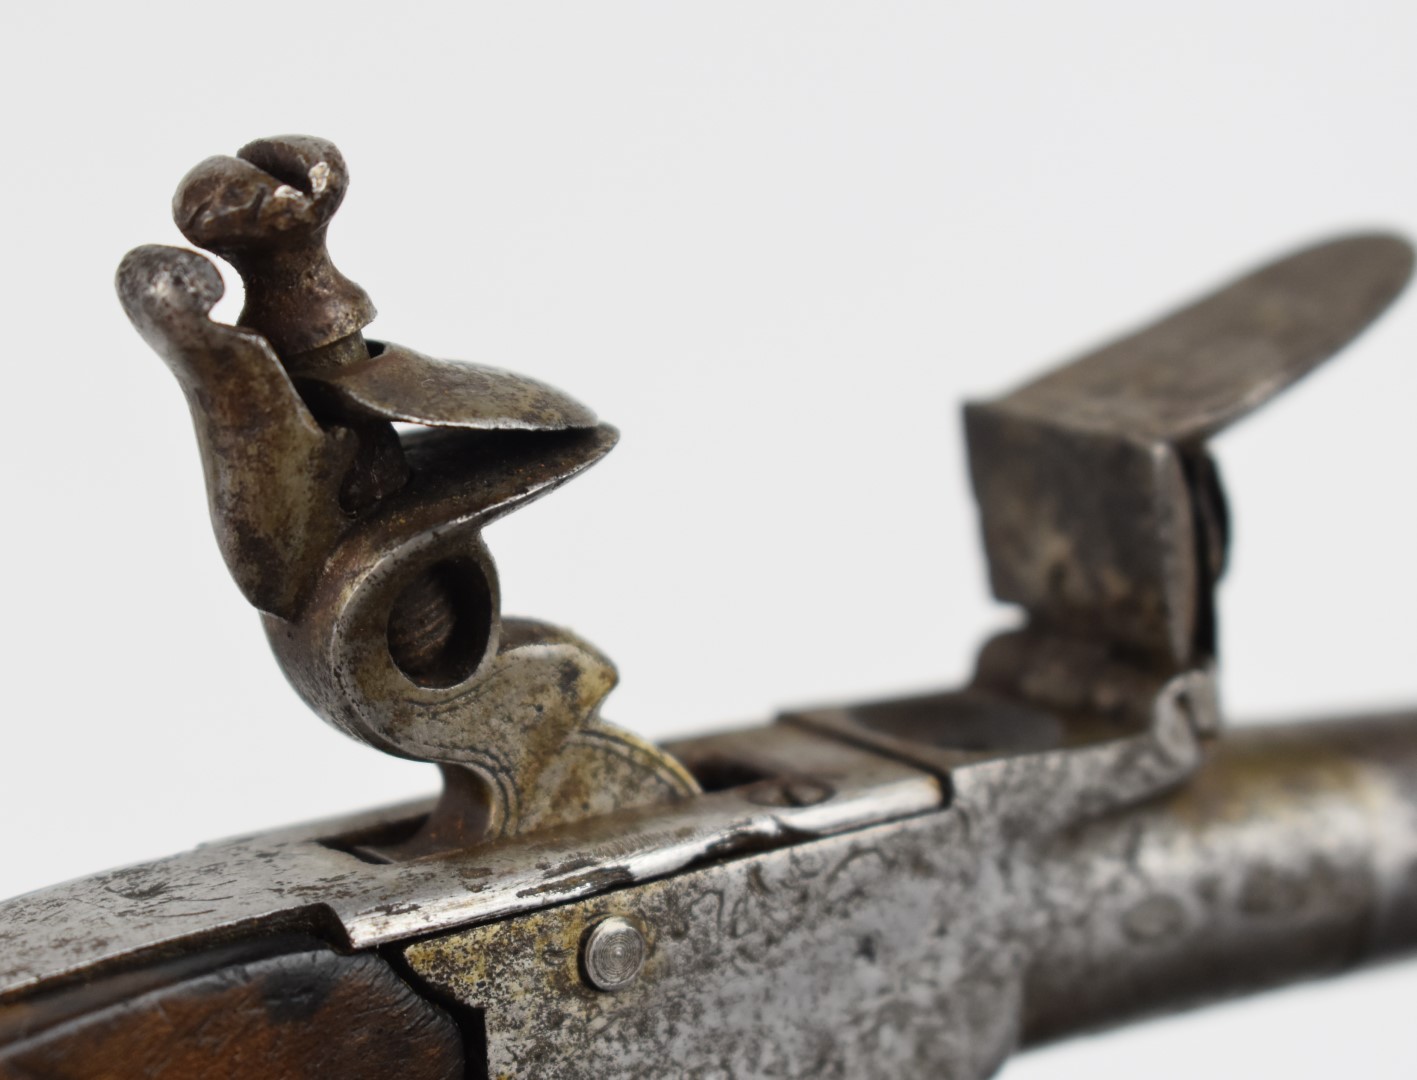 Indistinctly named flintlock pocket pistol with engraved lock and hammer, vacant shield shaped - Image 8 of 11